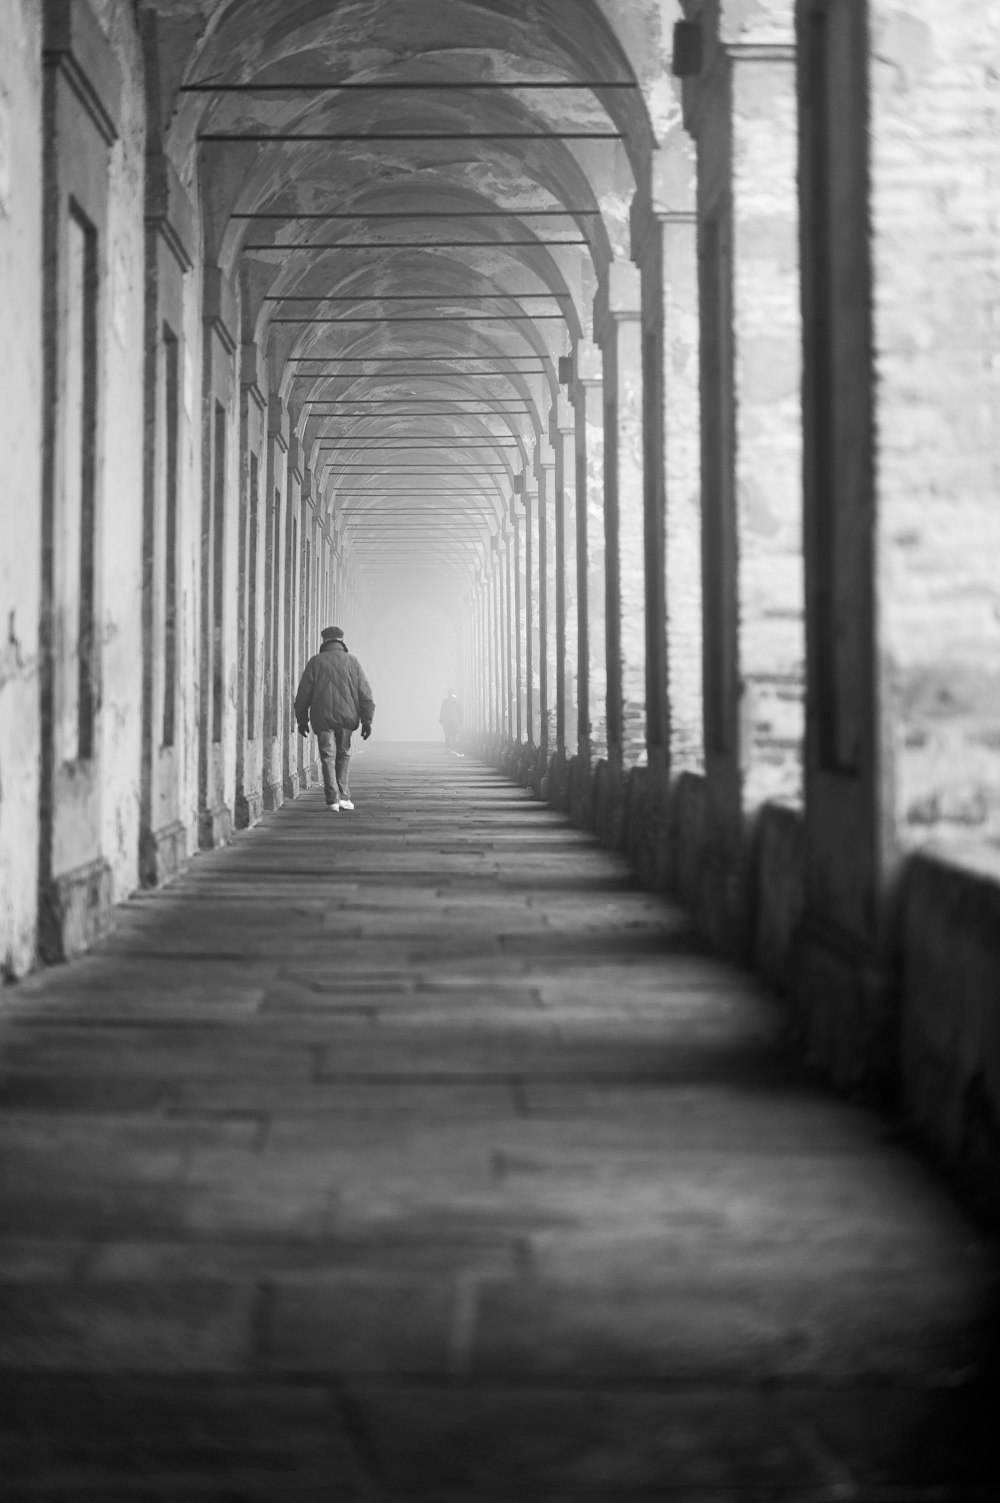 grayscale photo of person walking on pathway